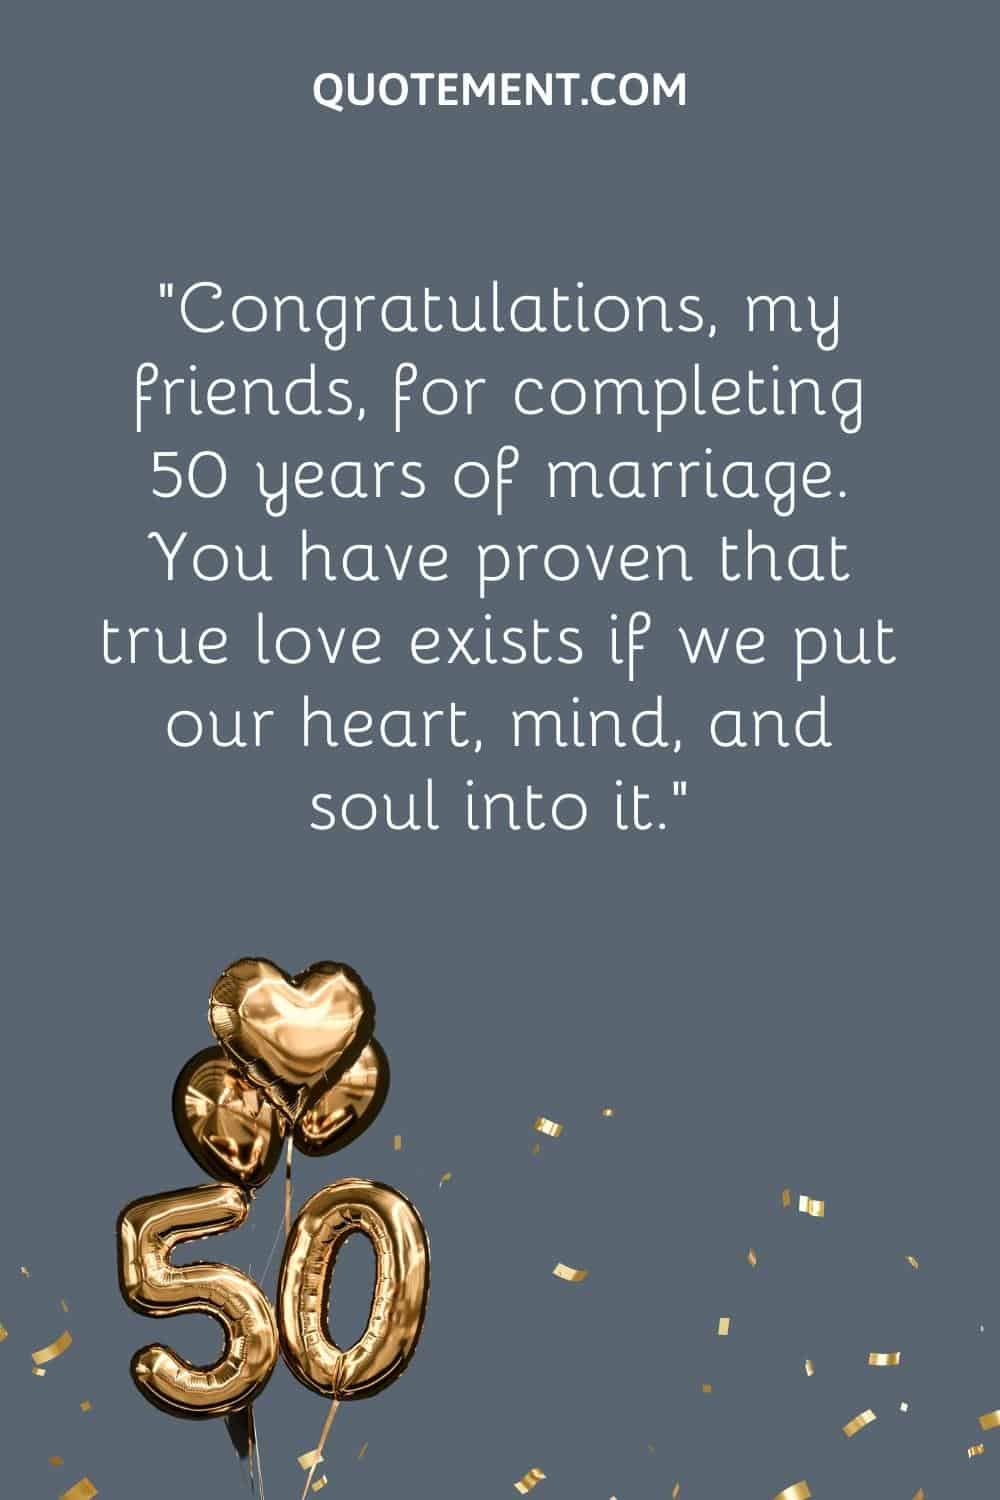 “Congratulations, my friends, for completing 50 years of marriage. You have proven that true love exists if we put our heart, mind, and soul into it.”